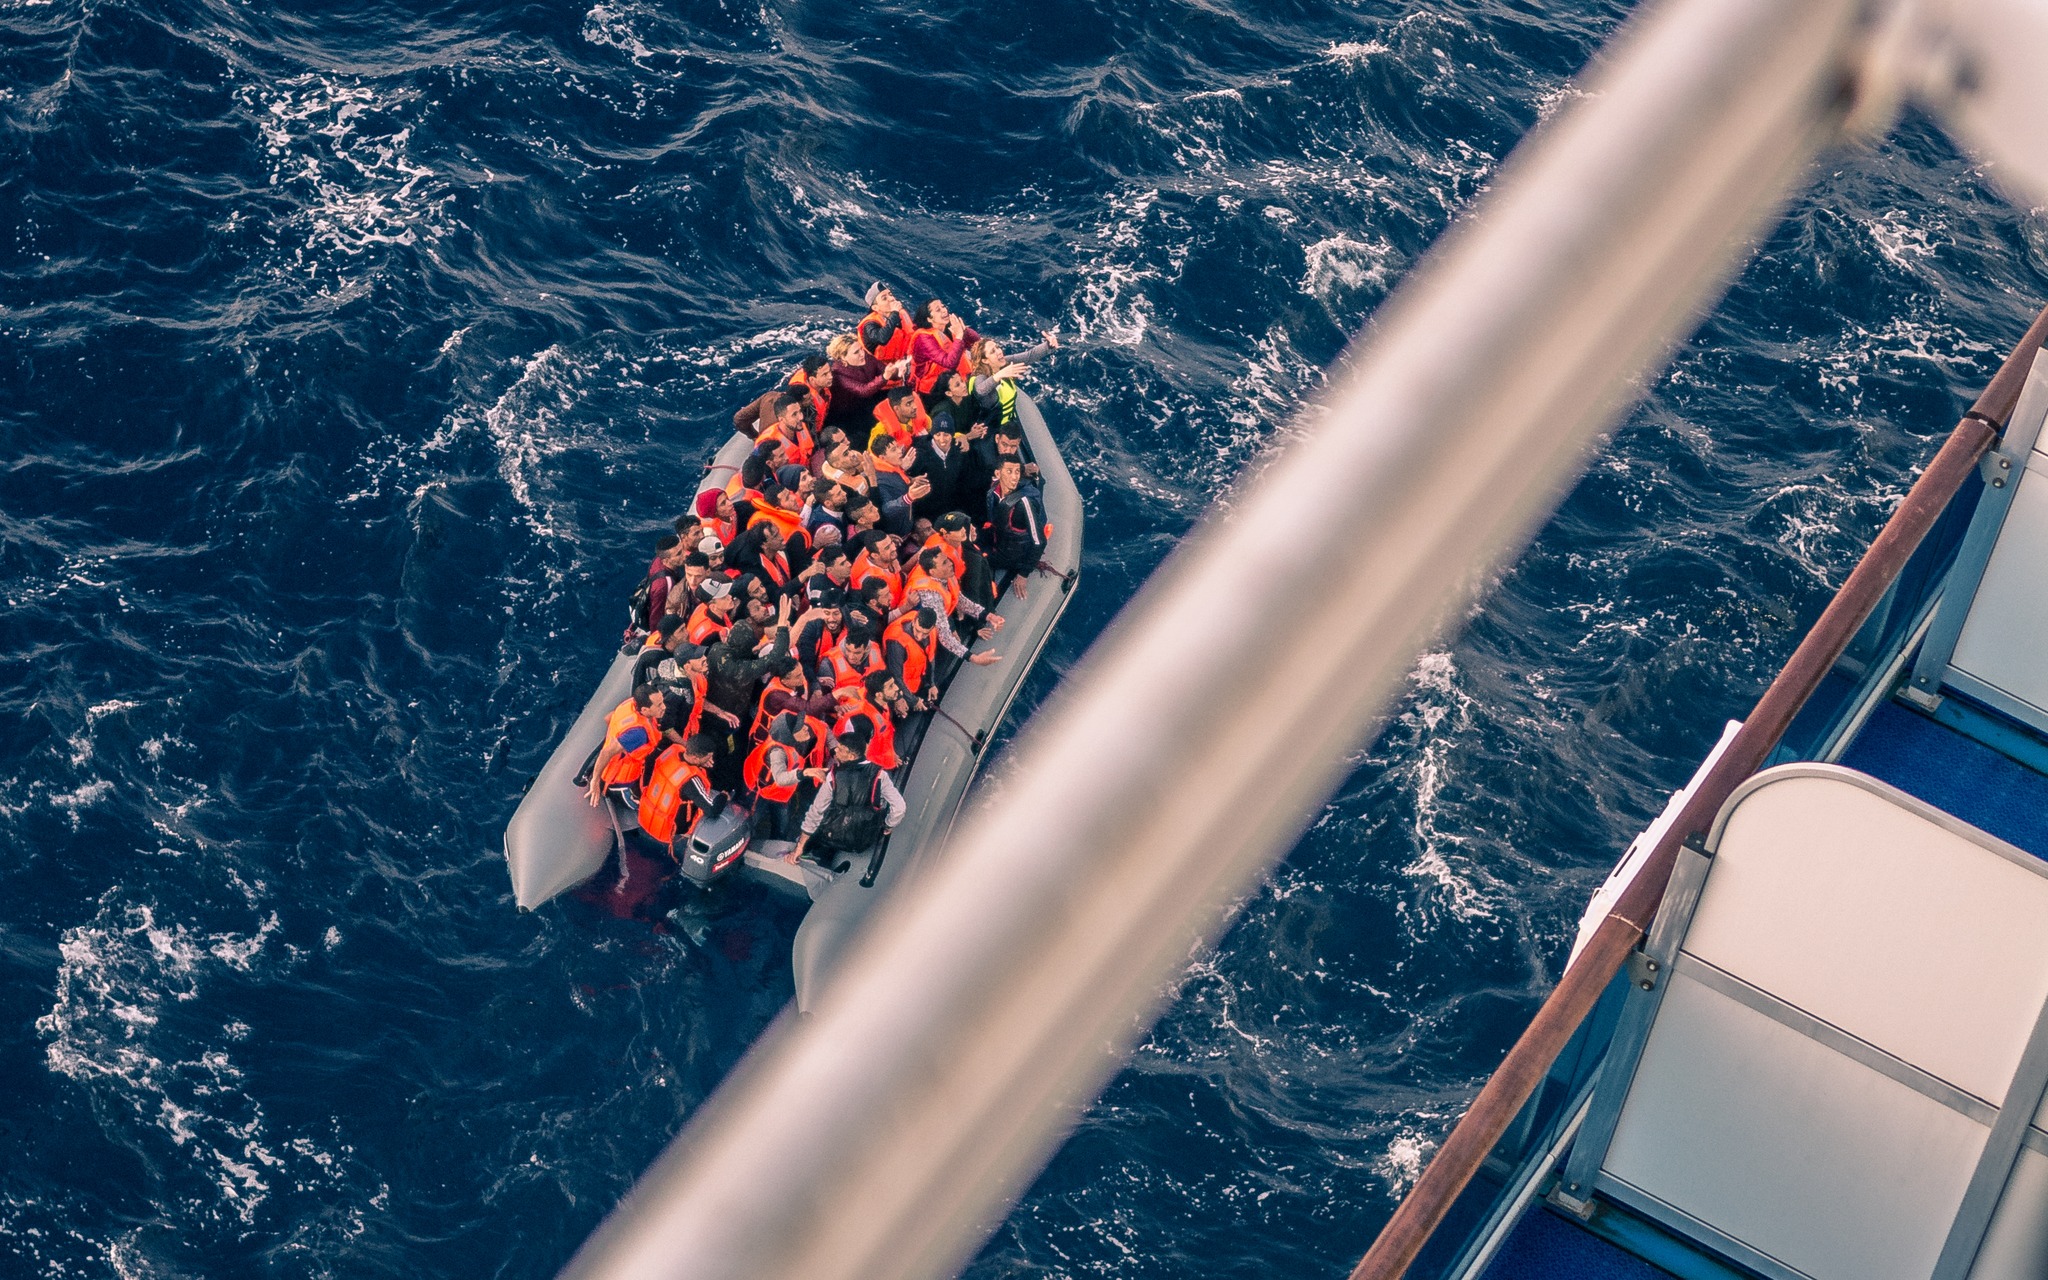 Report by Greek broadcaster: One of 9 men arrested in migrant boat capsizing admits to role in smuggling